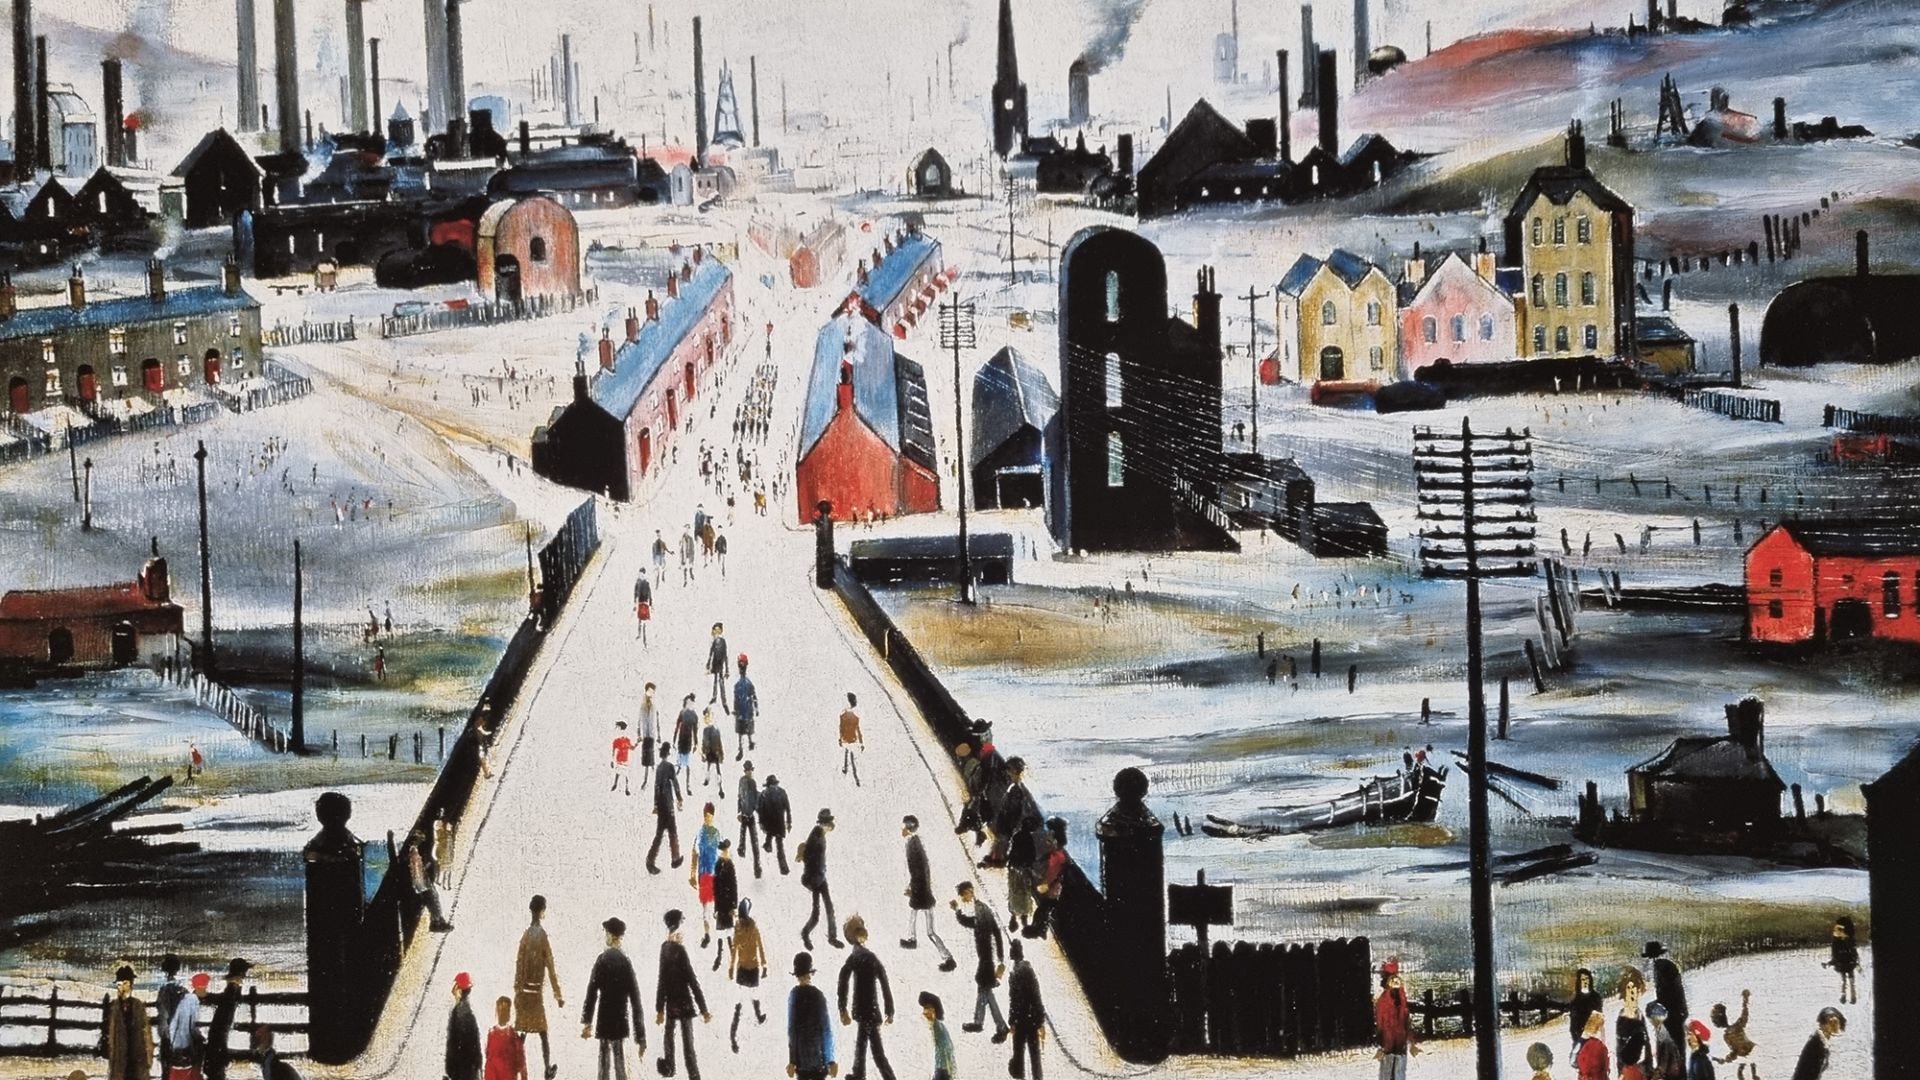 Limited Edition by L.S. Lowry titled "The Canal Bridge, 1949". - Image 4 of 7